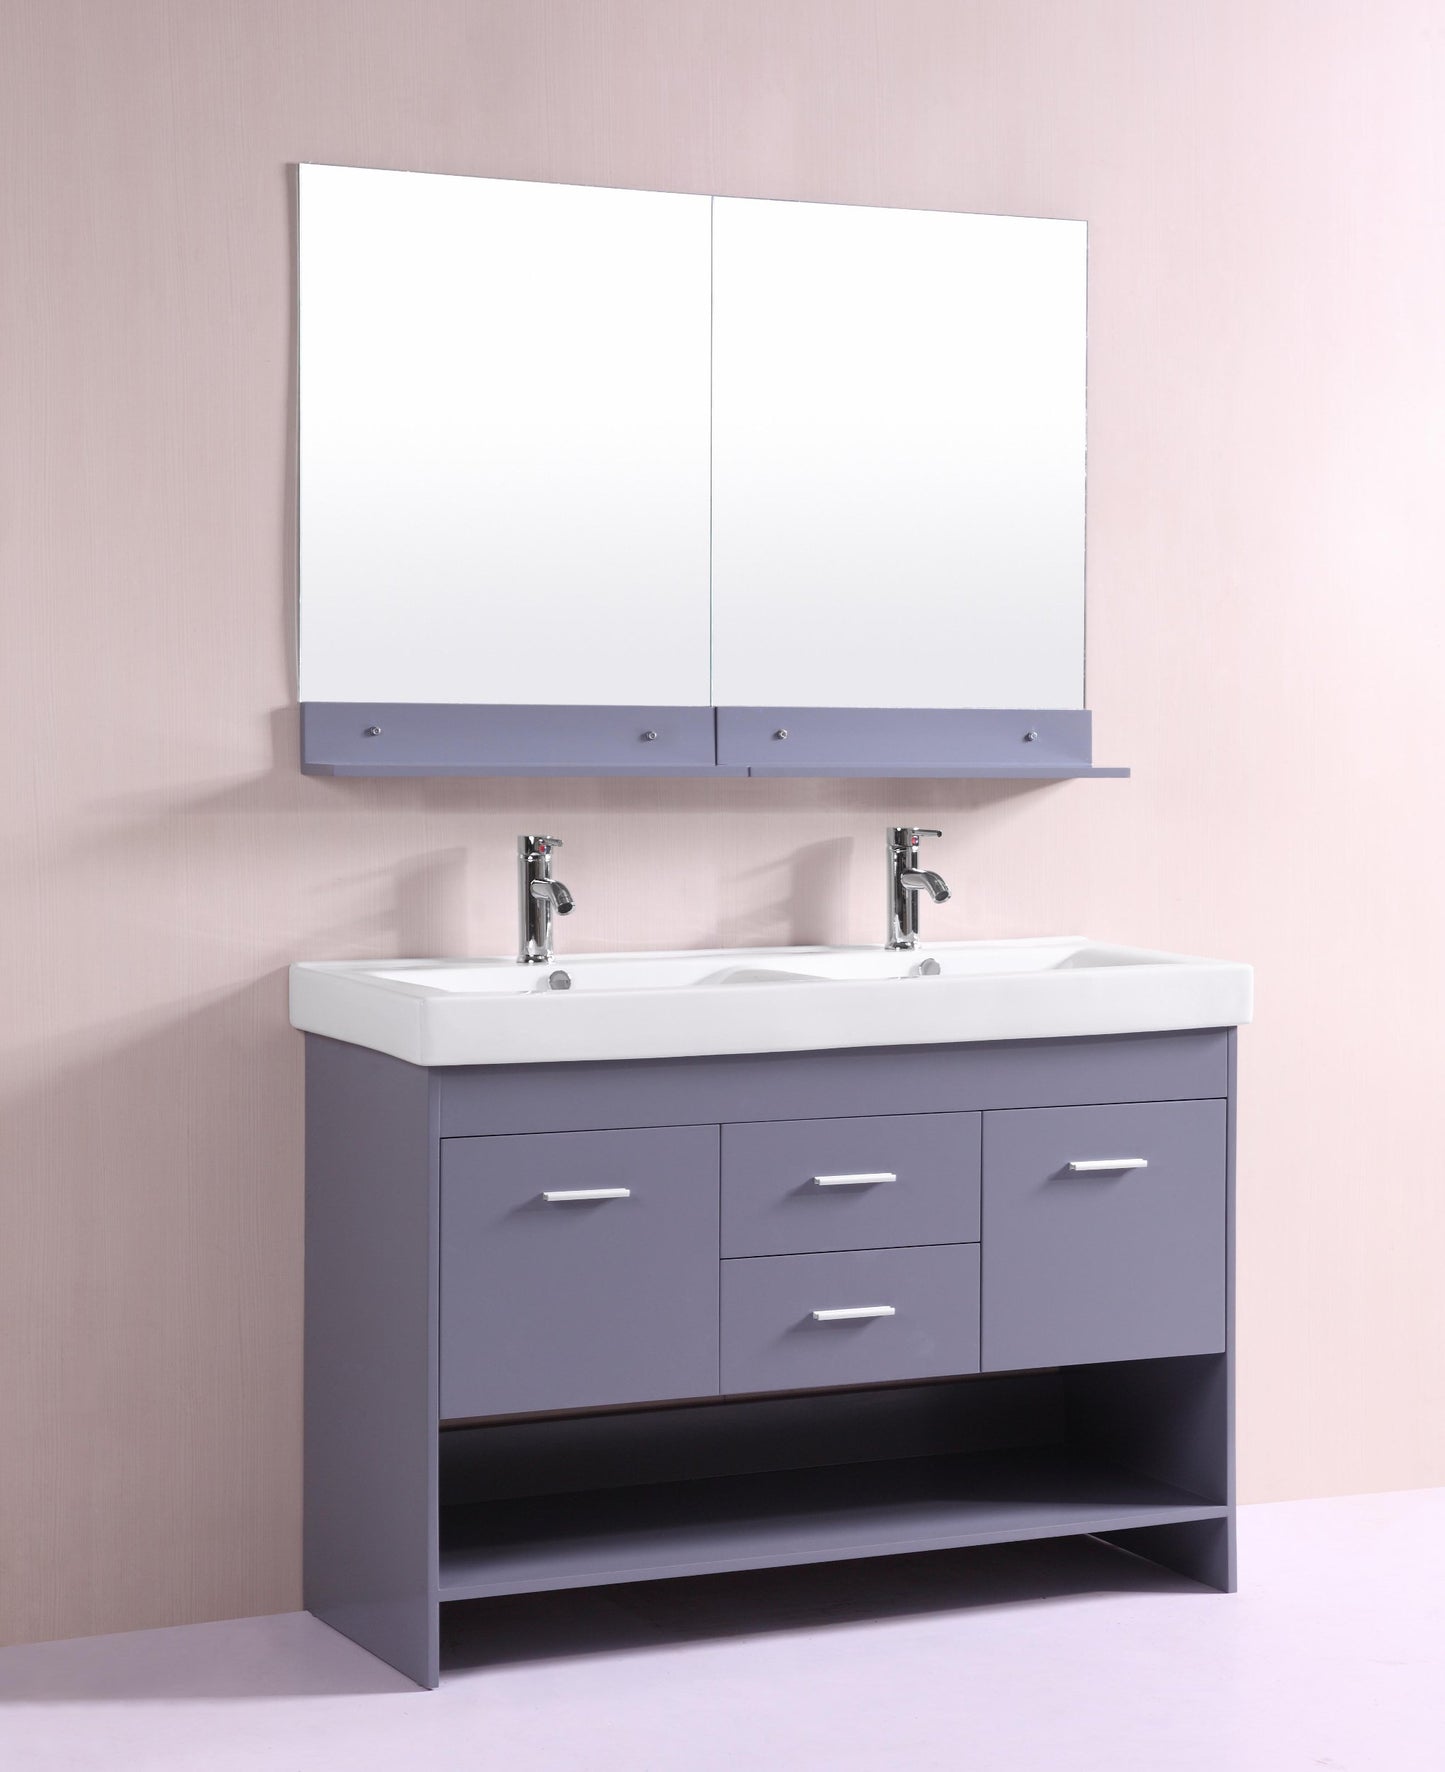 Totti Gloria 48 inch Double Sink Bathroom Vanity with White Integrated Double Porcelain Sink - Luxe Bathroom Vanities Luxury Bathroom Fixtures Bathroom Furniture